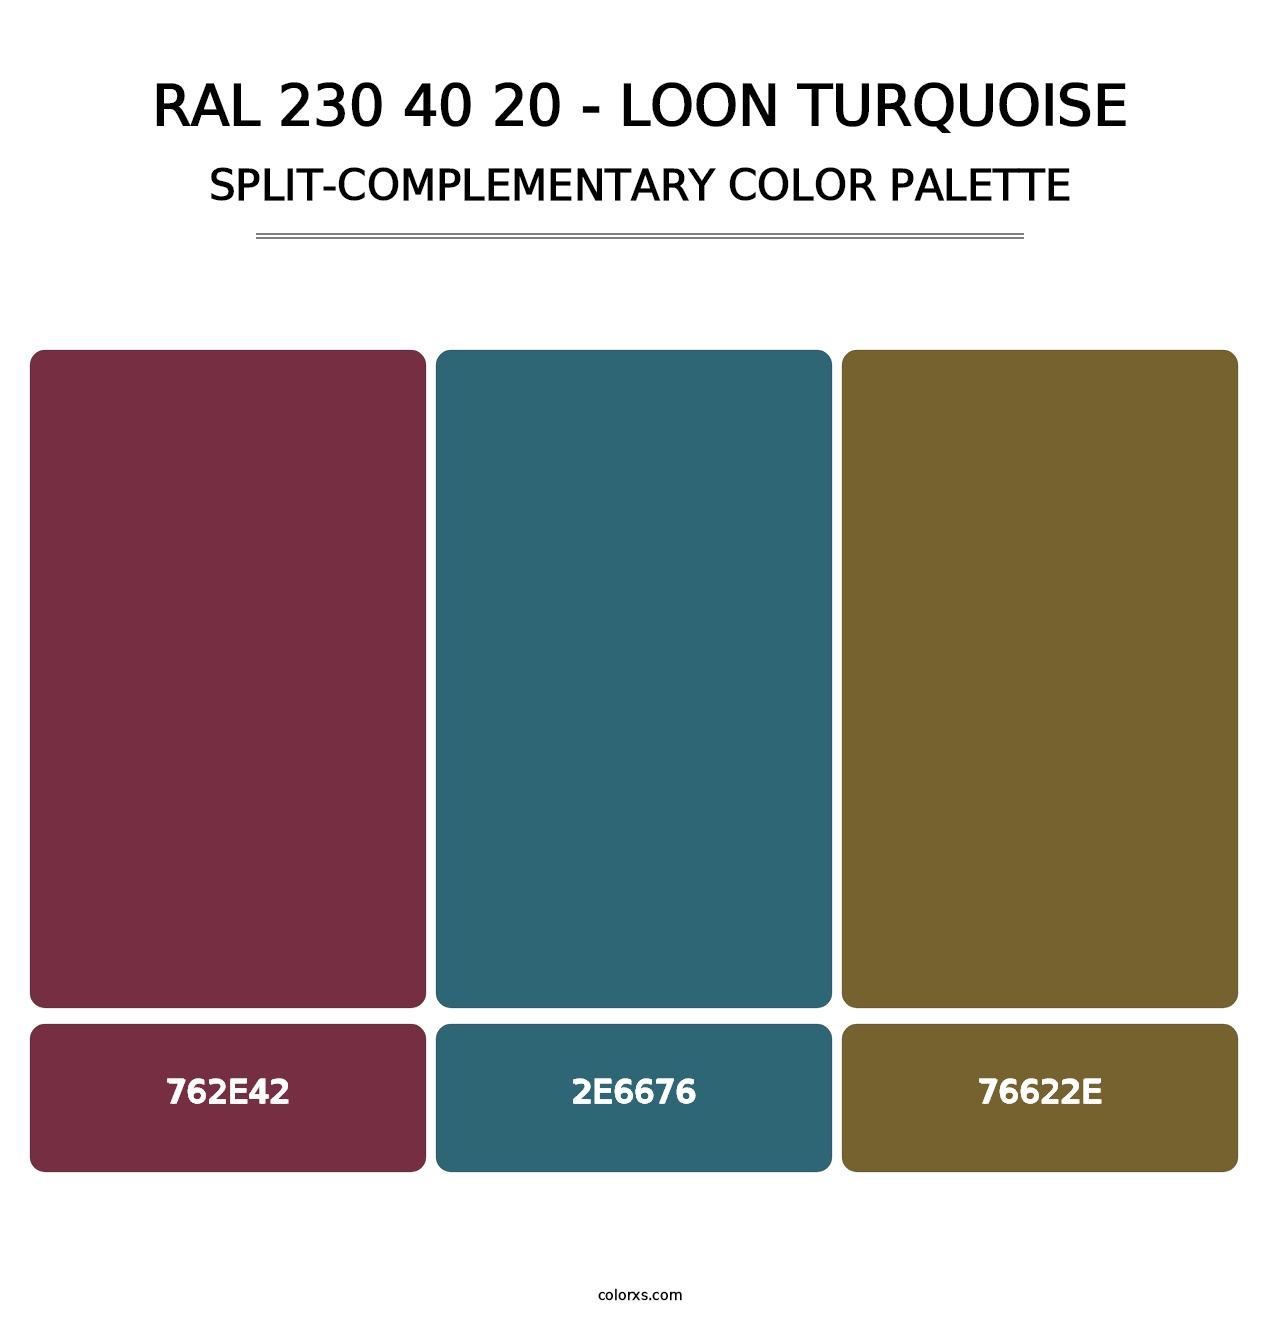 RAL 230 40 20 - Loon Turquoise - Split-Complementary Color Palette